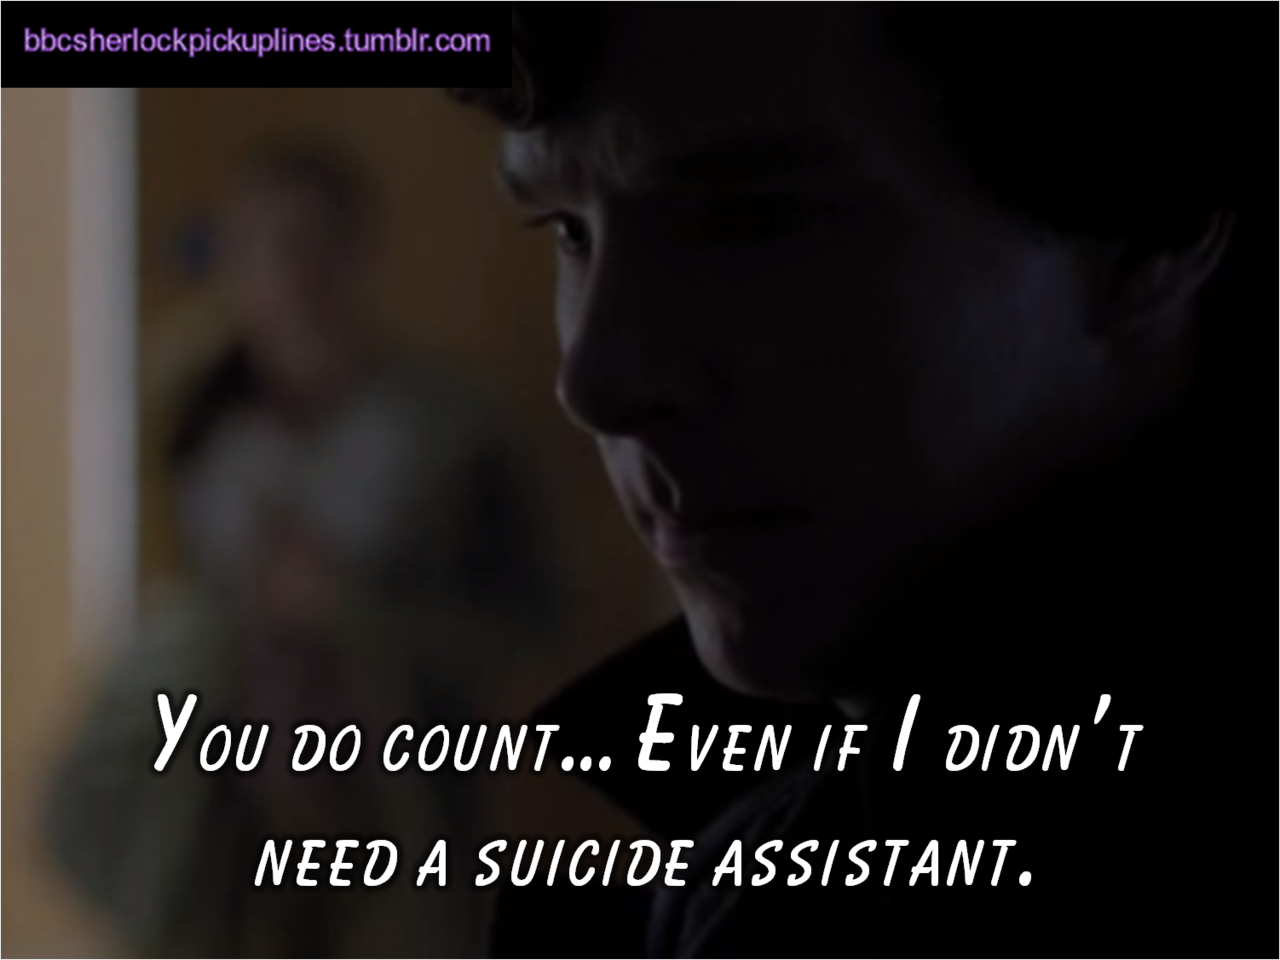 &ldquo;You do count&hellip; Even if I didn&rsquo;t need a suicide assistant.&rdquo;